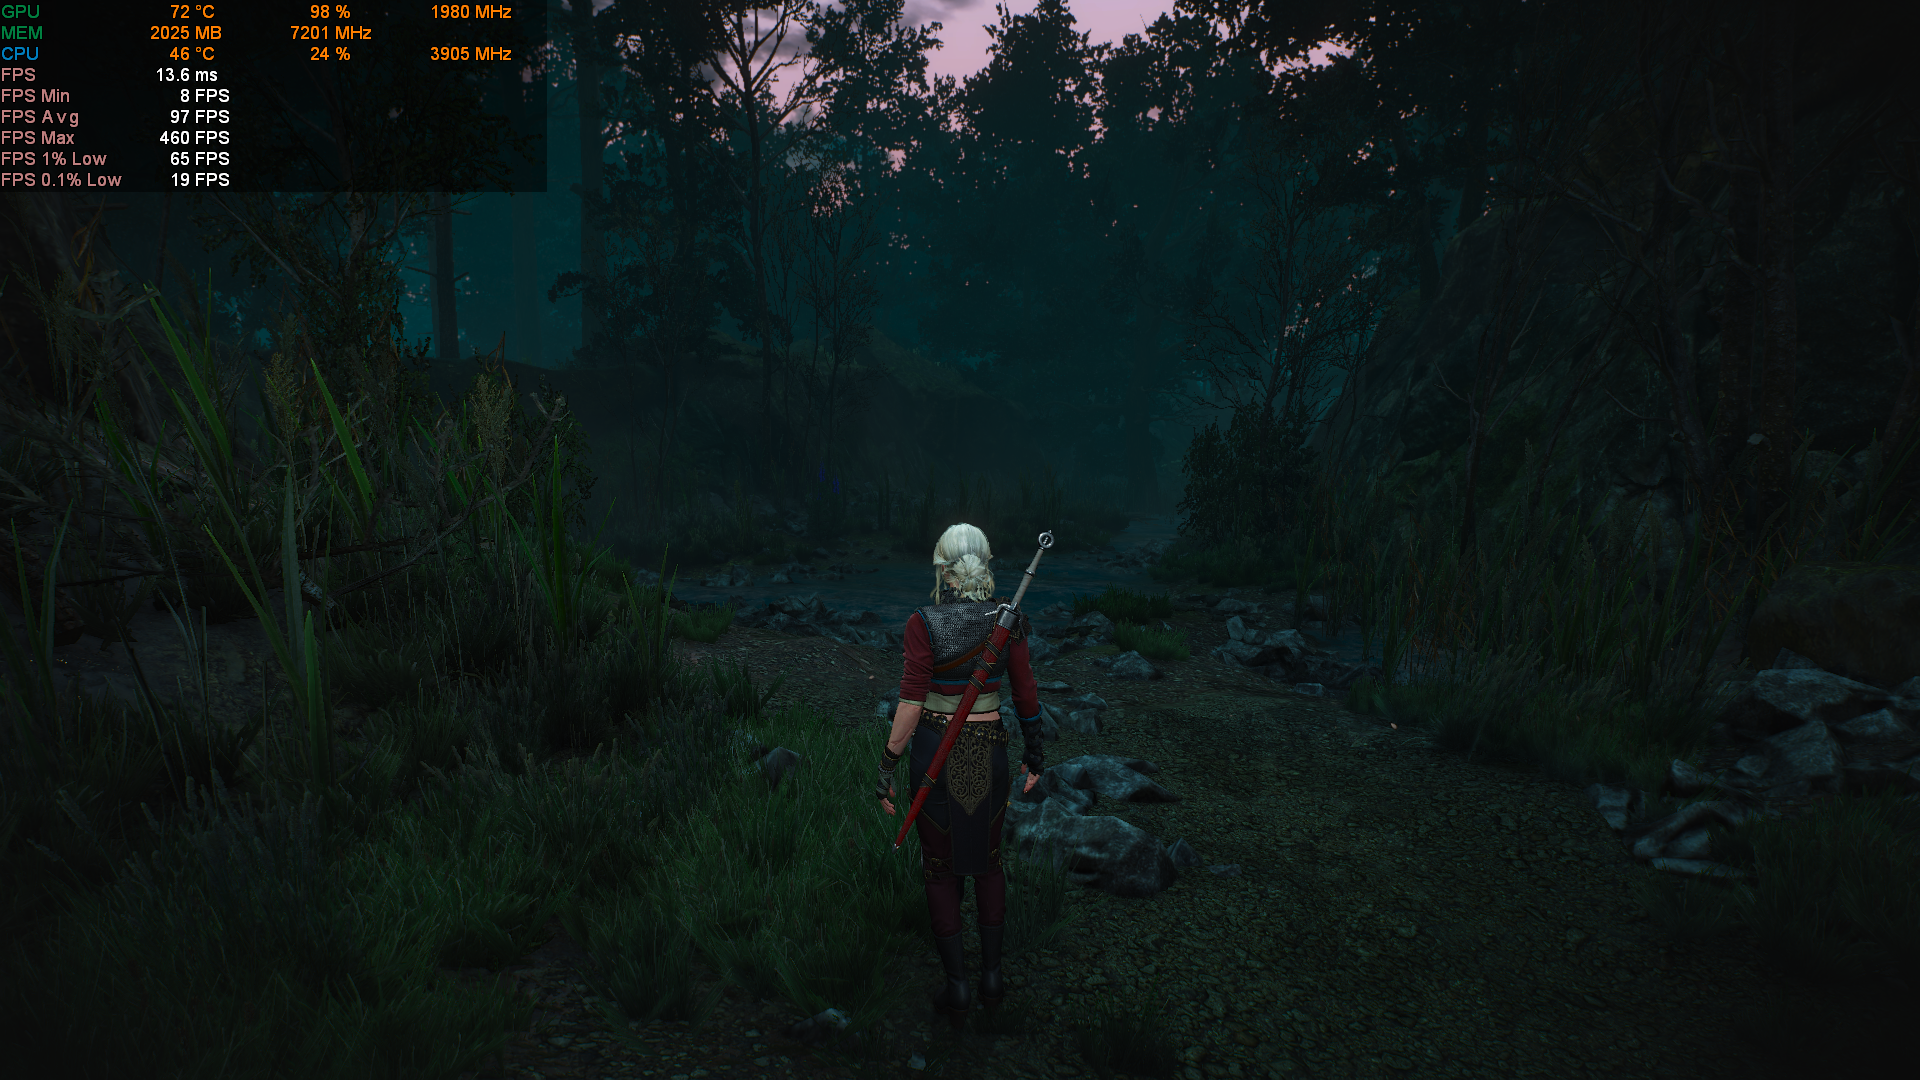 The Witcher 3 Screenshot 2020.12.29 - 16.22.36.66.png